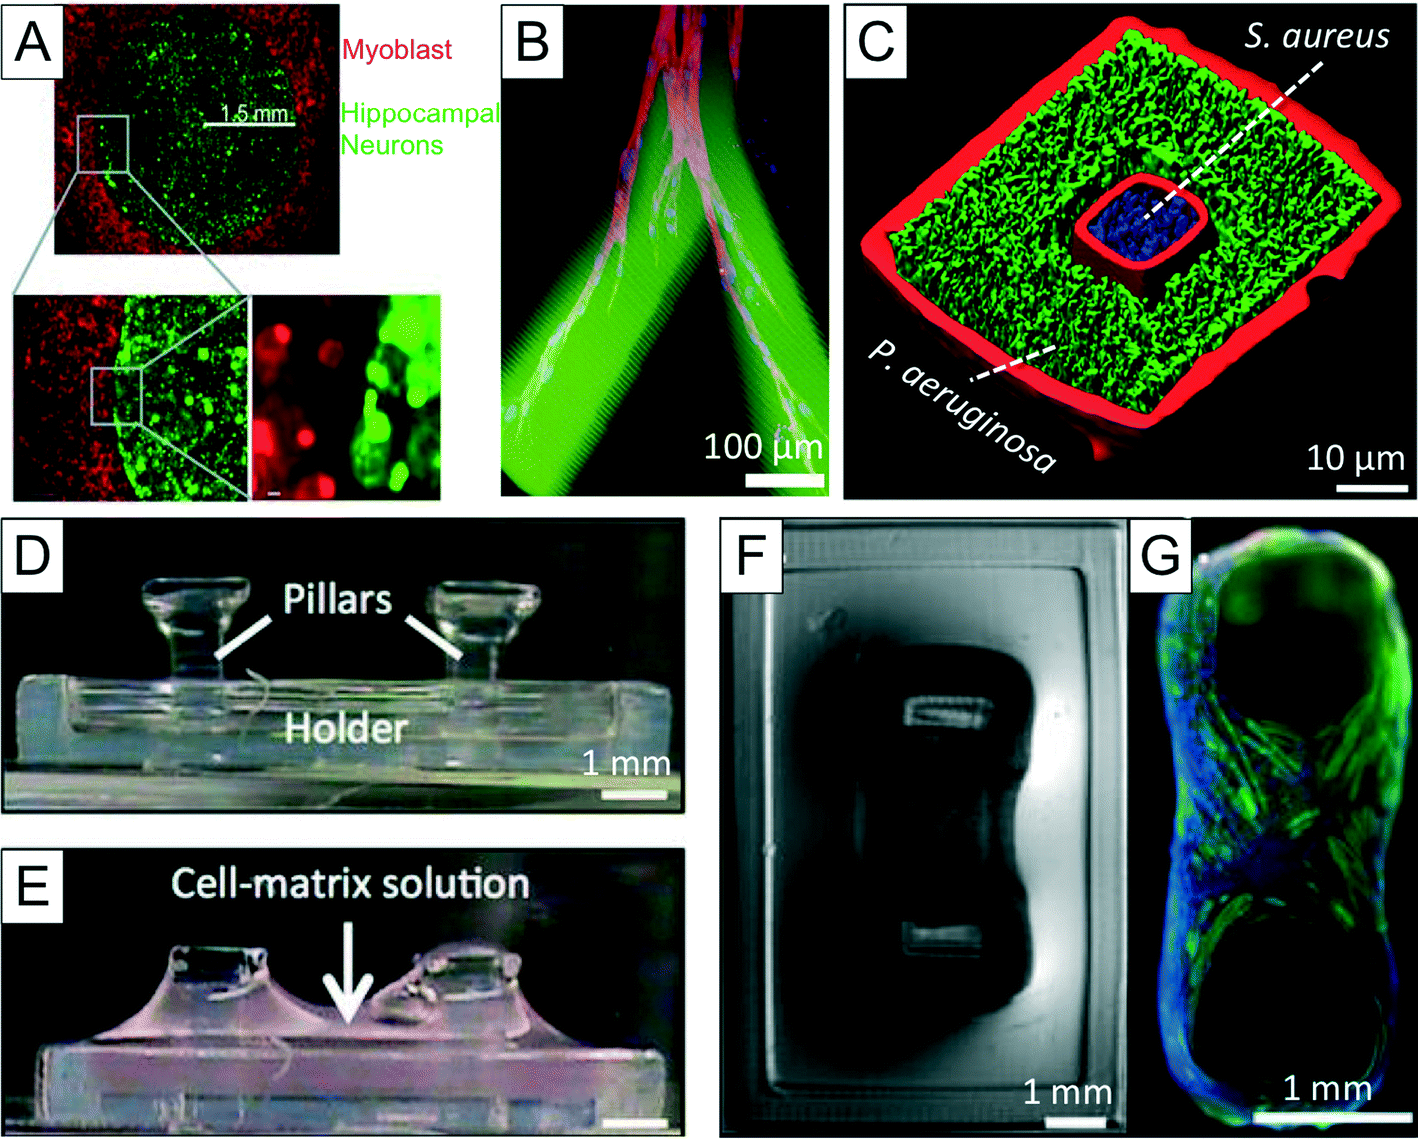 The upcoming 3D-printing revolution in microfluidics - Lab on a Chip (RSC  Publishing) DOI:10.1039/C6LC00163G